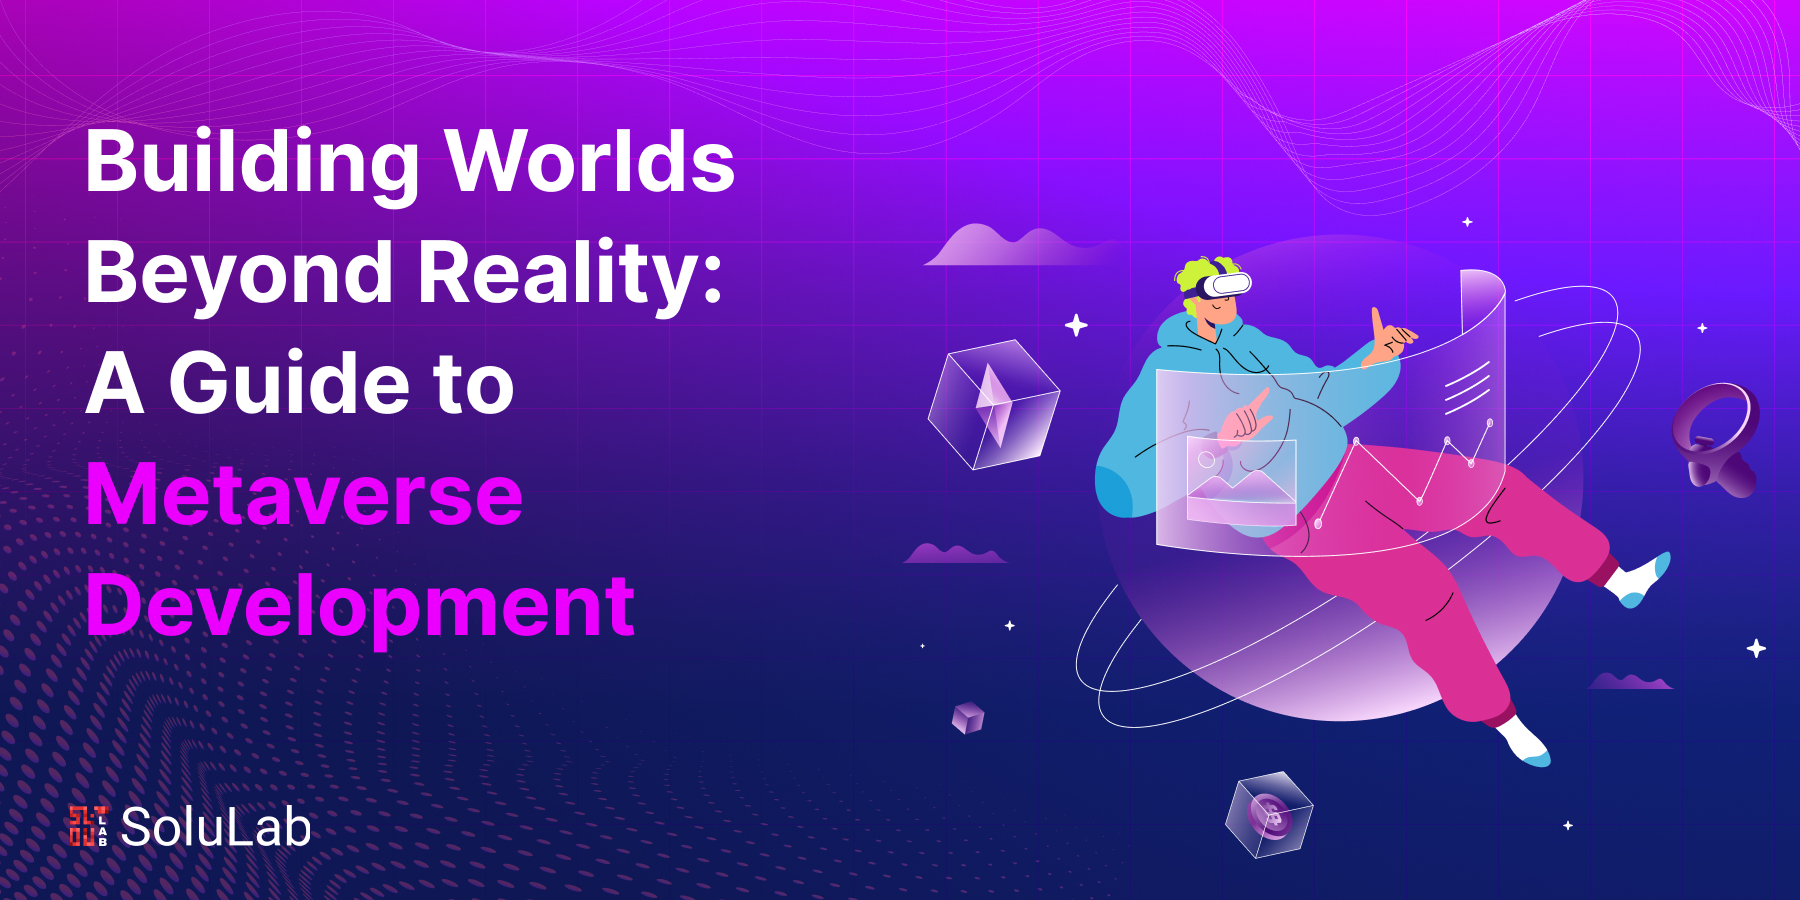 Building Worlds Beyond Reality: A Guide to Metaverse Development